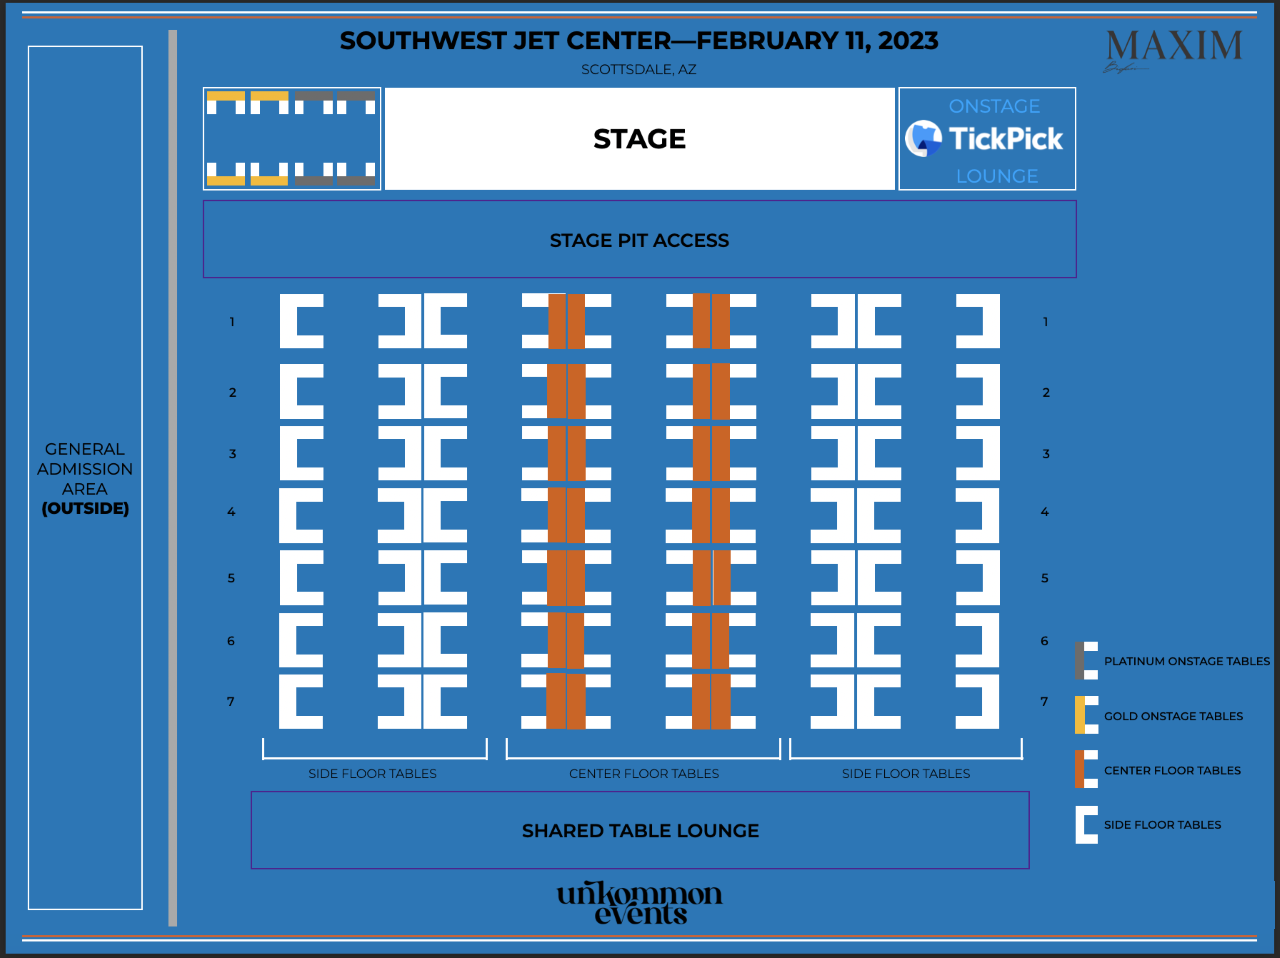 VIP Exclusives Floor Plan for the 2023 Maxim Super Bowl Party - Maxim Catch Me If You Can. Southwest Jet Center in Scottsdale, Arizona on February 11, 2023